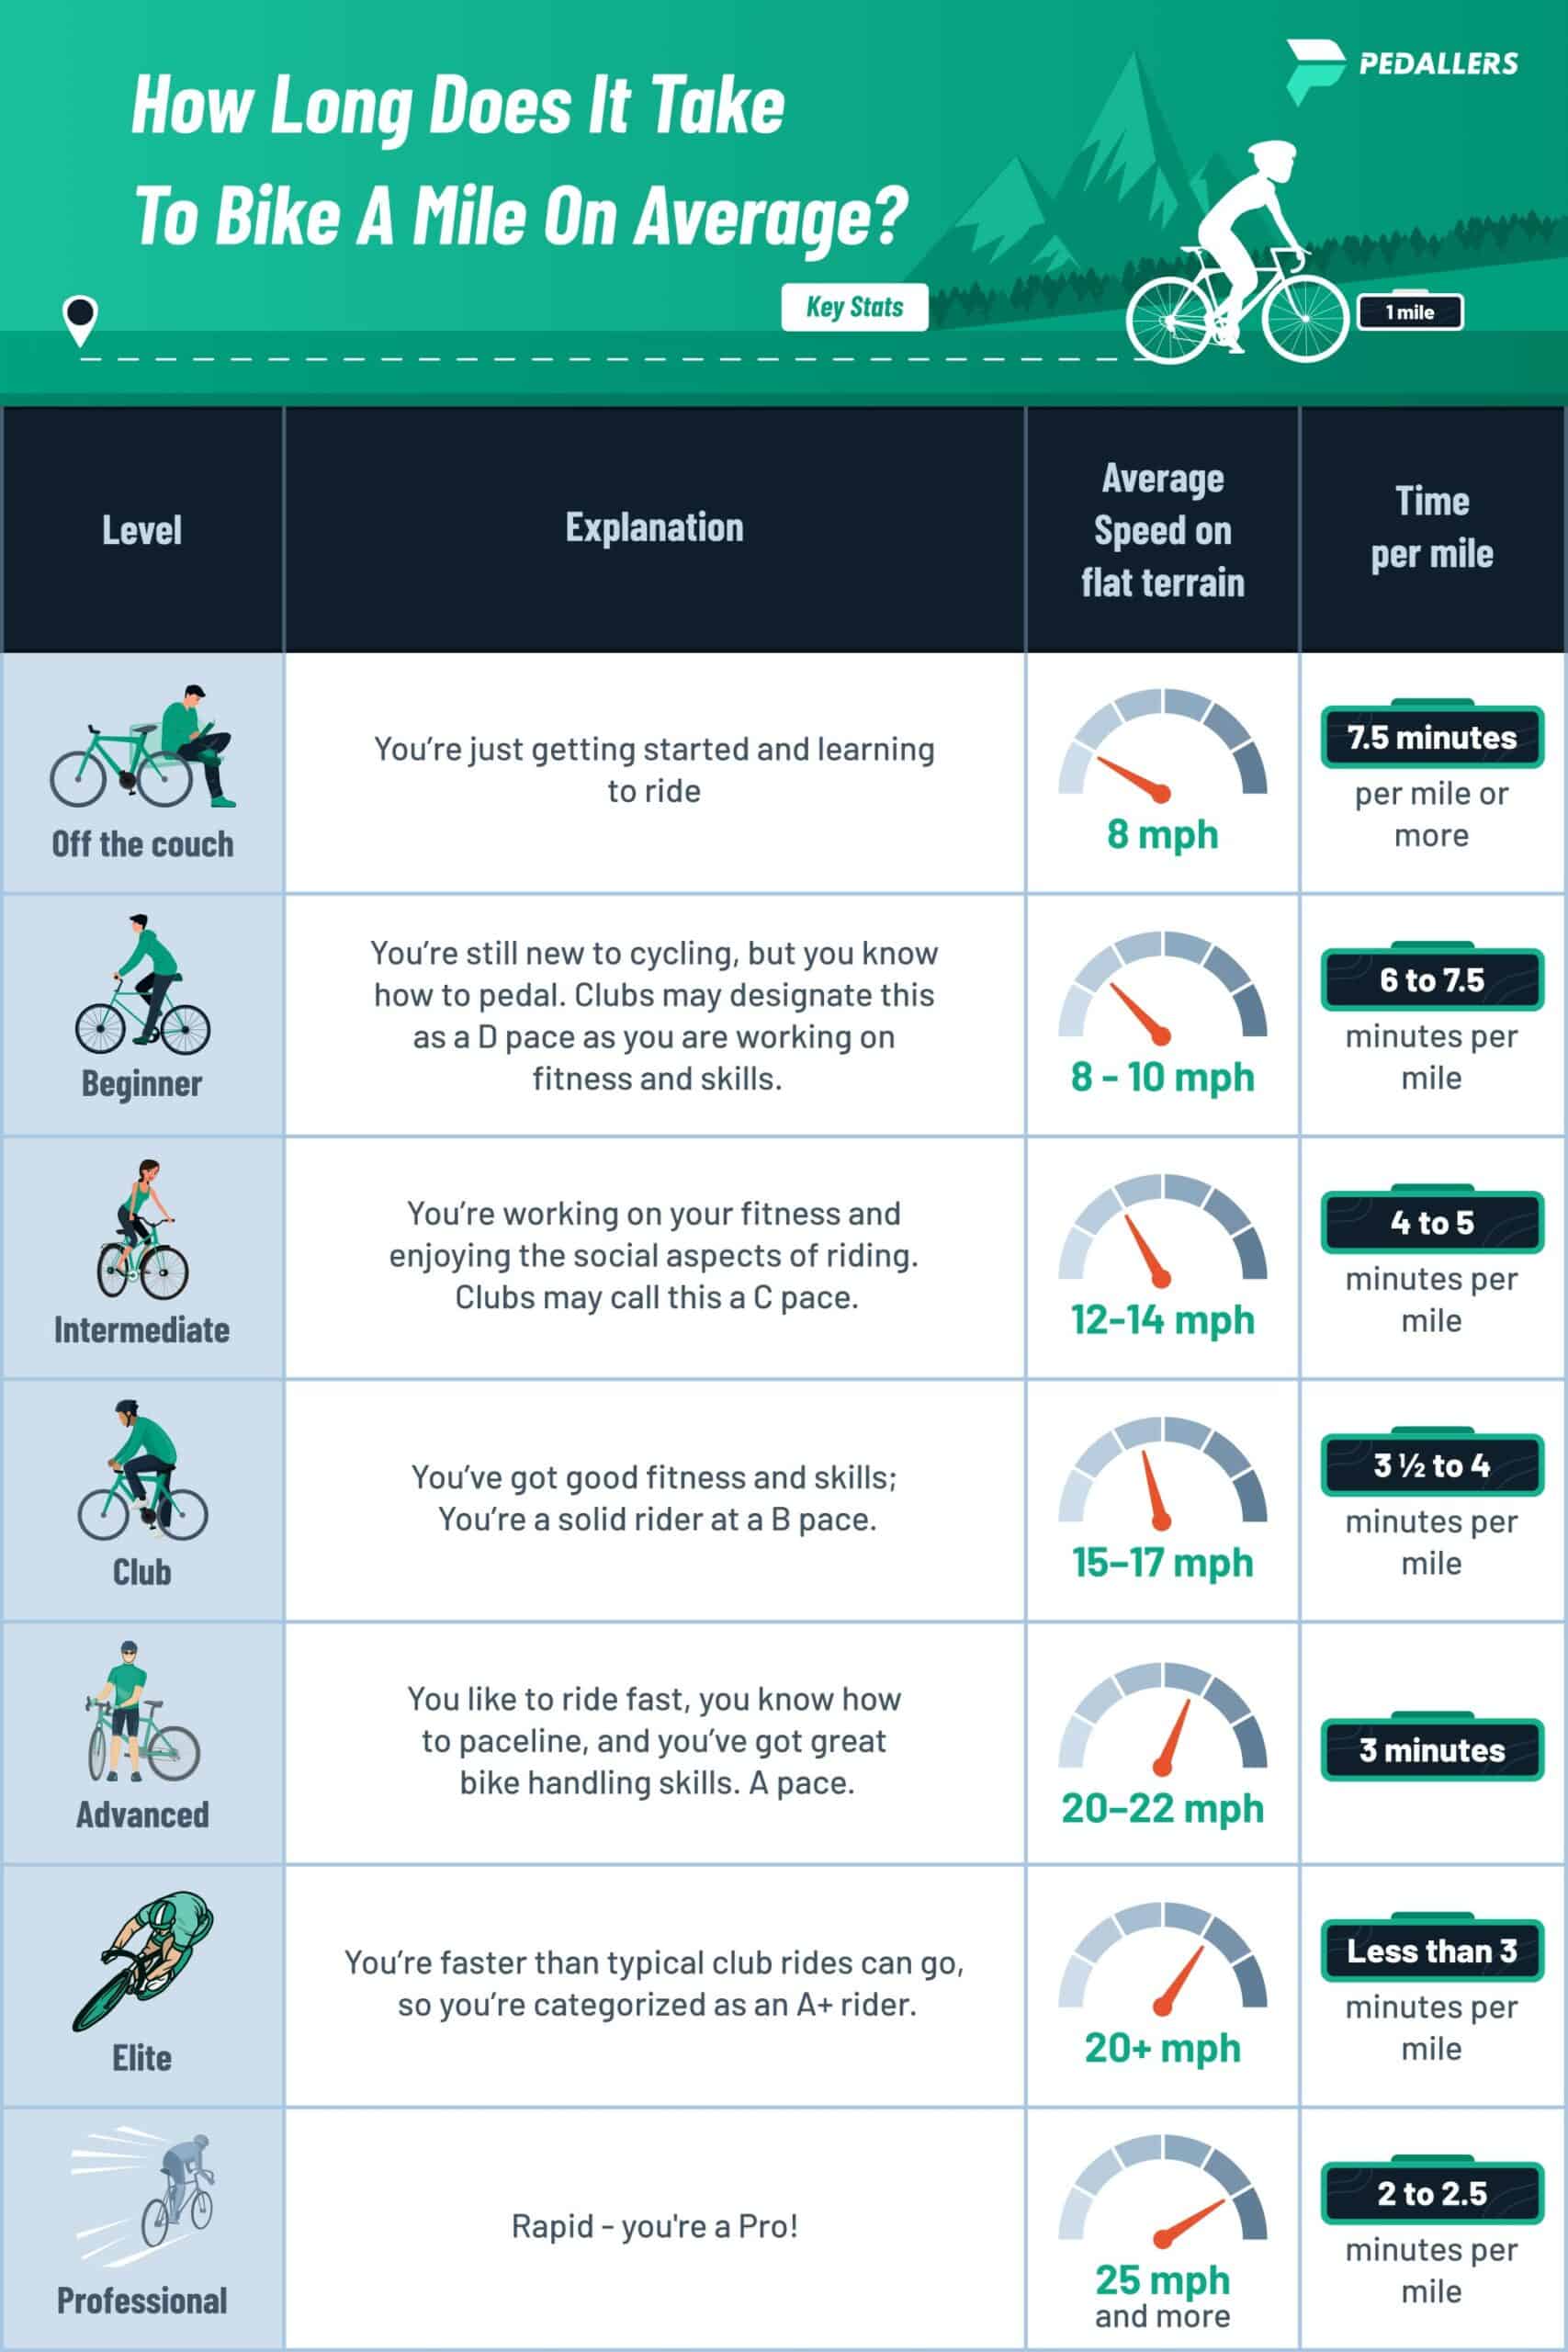 How Long Does It Take To Bike A Mile On Average